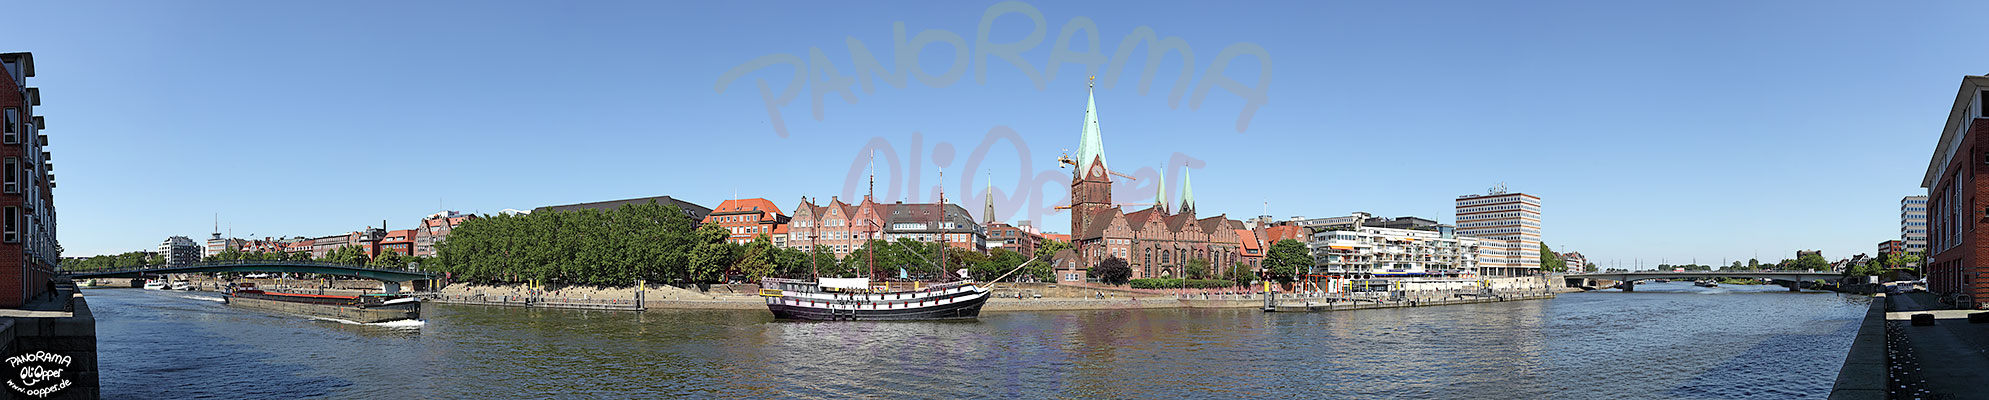 Panorama Bremen - Weser - p010 - (c) by Oliver Opper